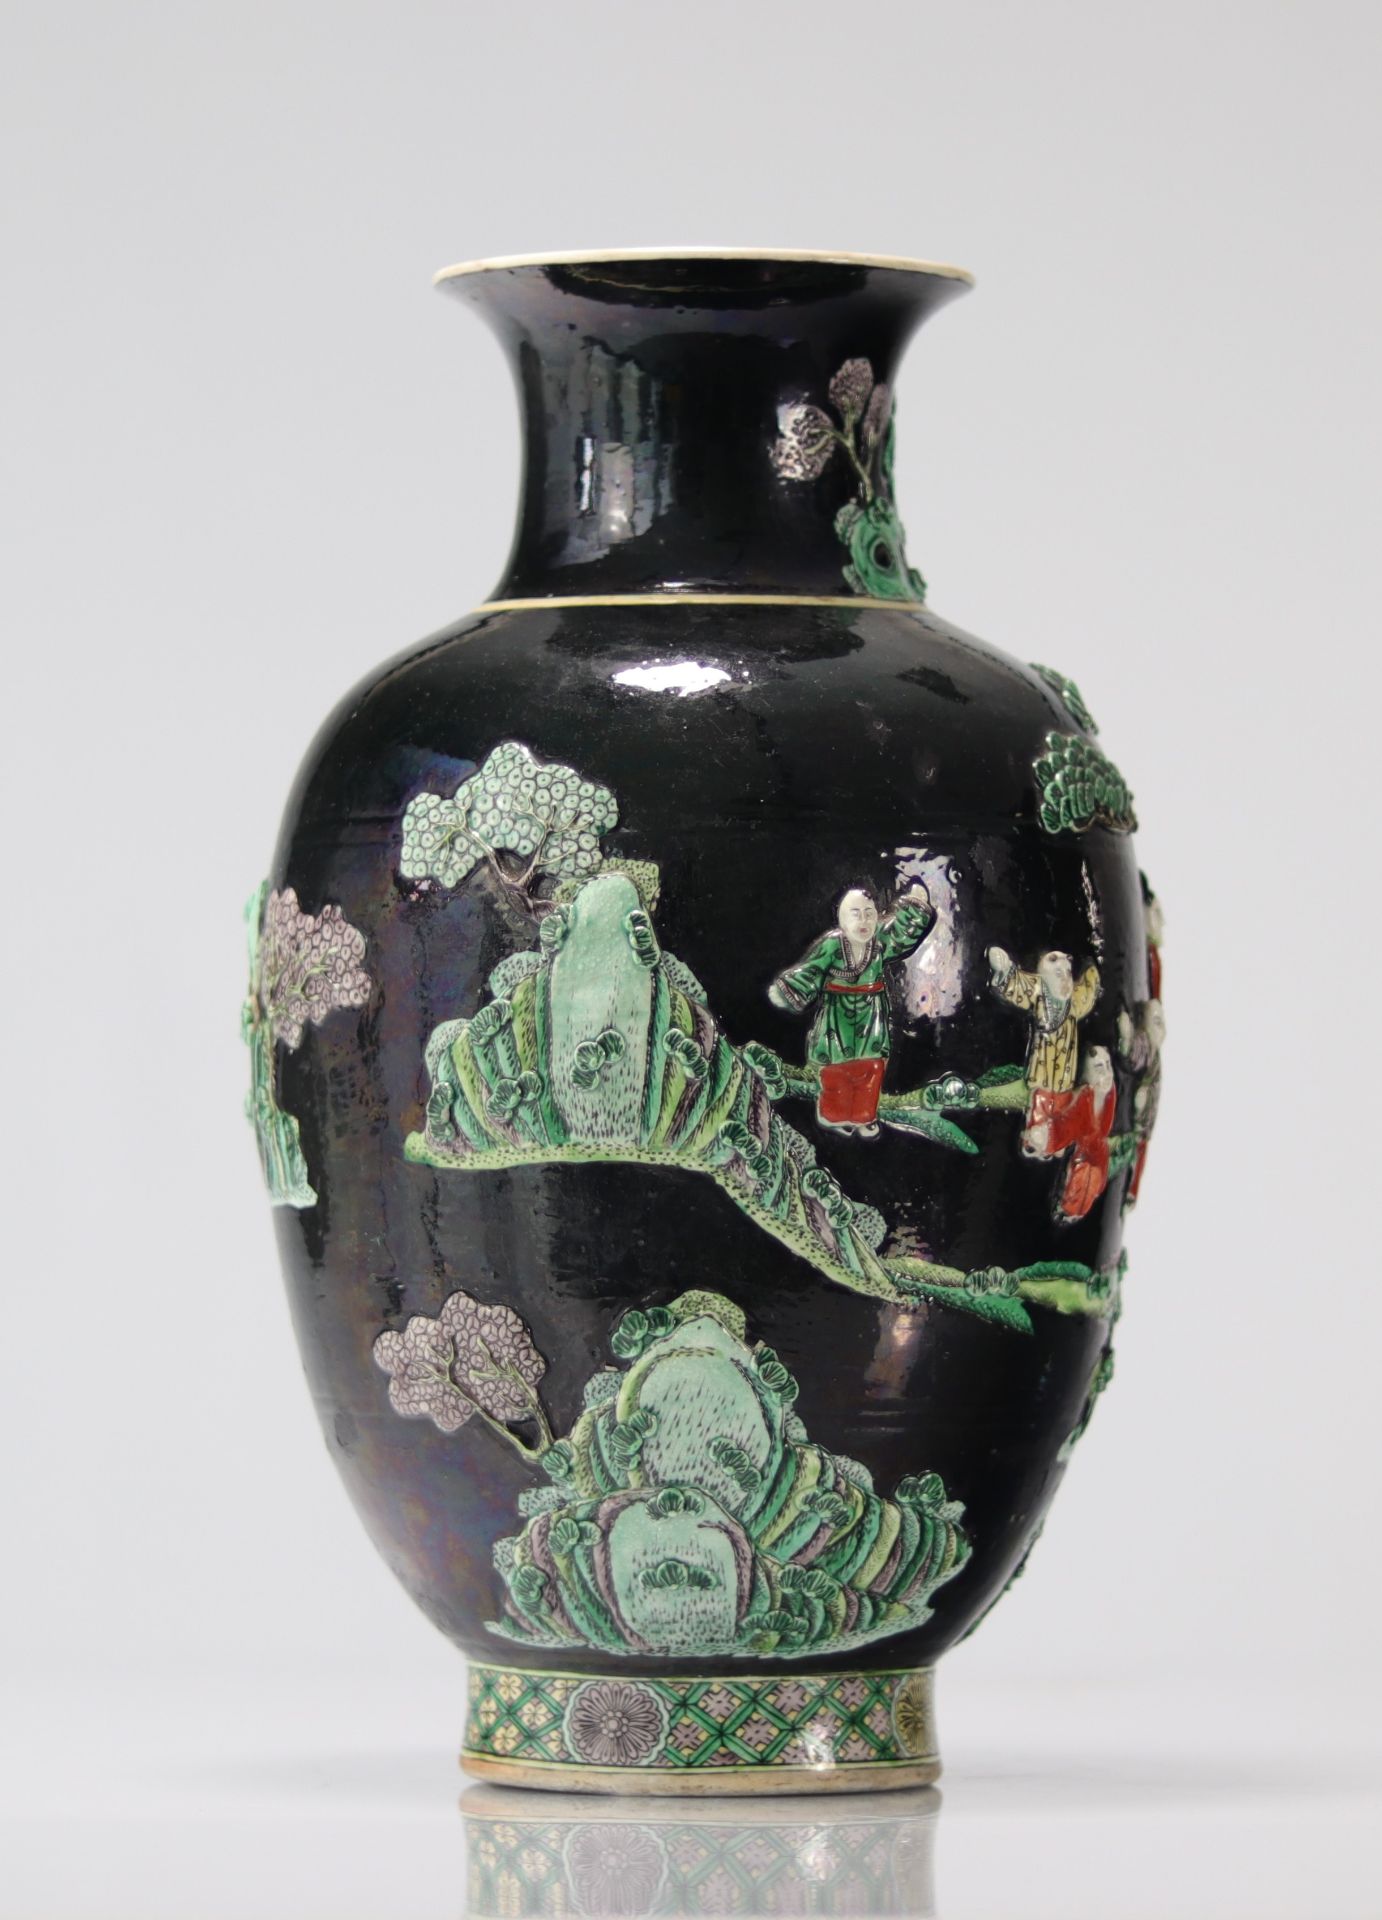 Relief vase decorated with yongzheng brand characters - Image 4 of 8